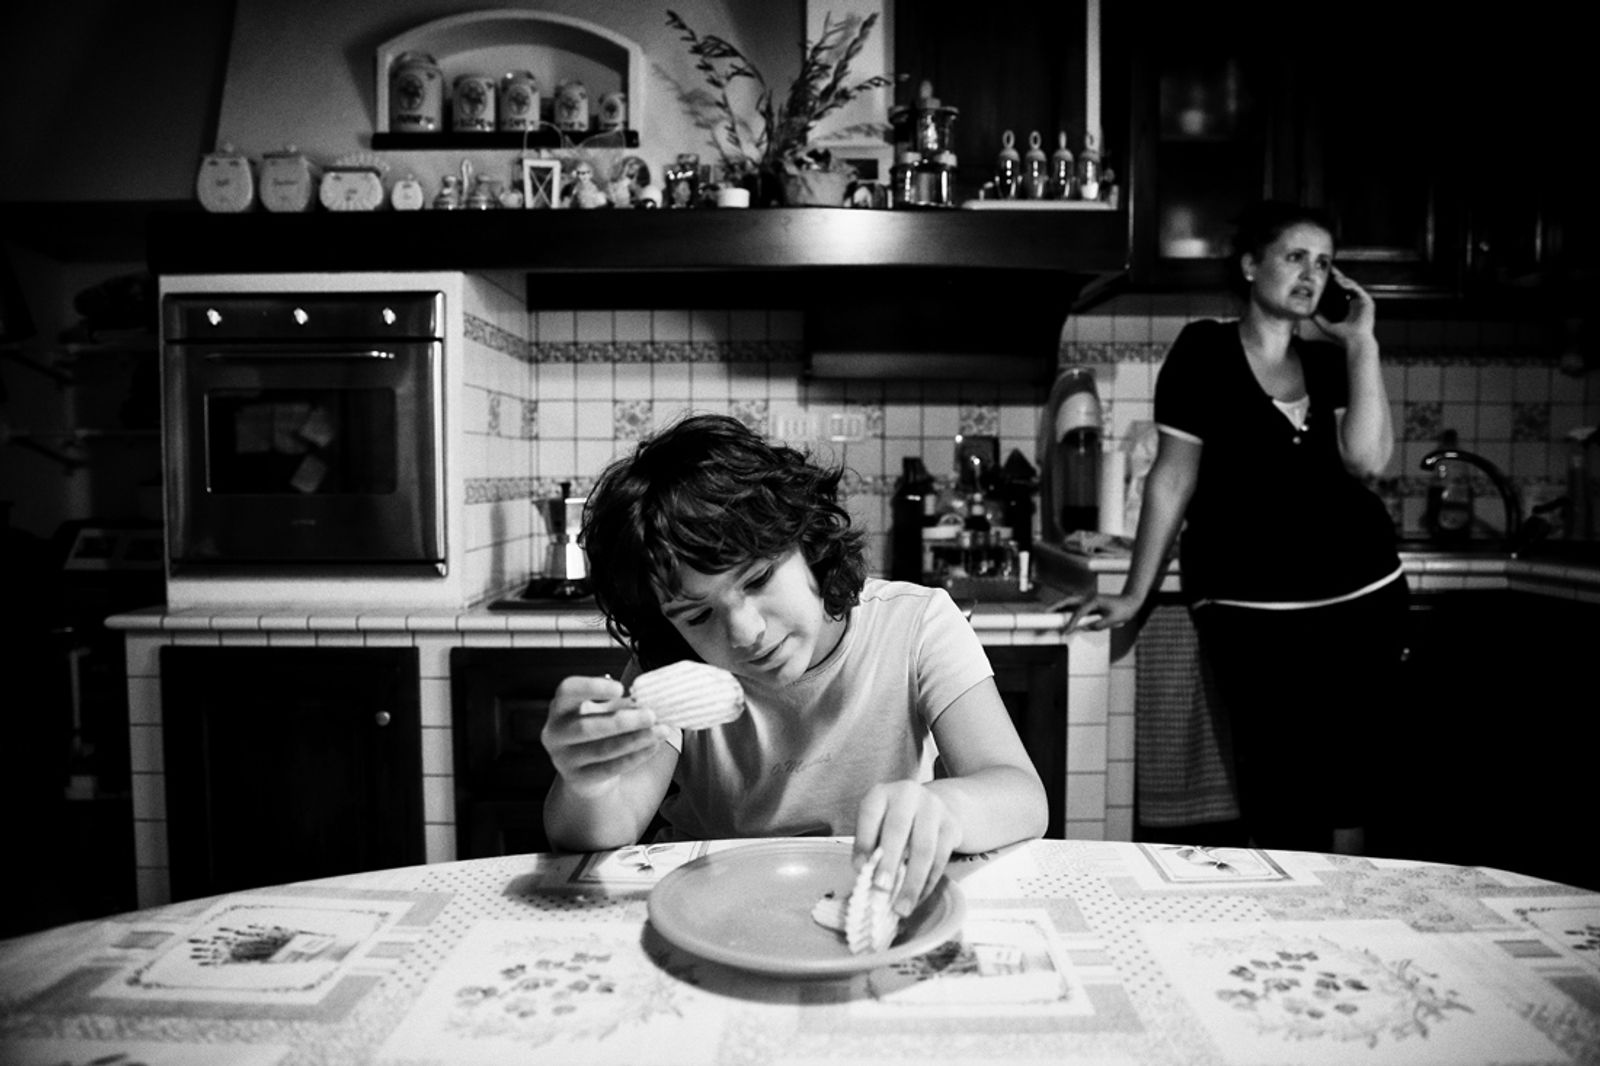 © BARBARA ZANON - Image from the The daily life of three siblings with autism photography project